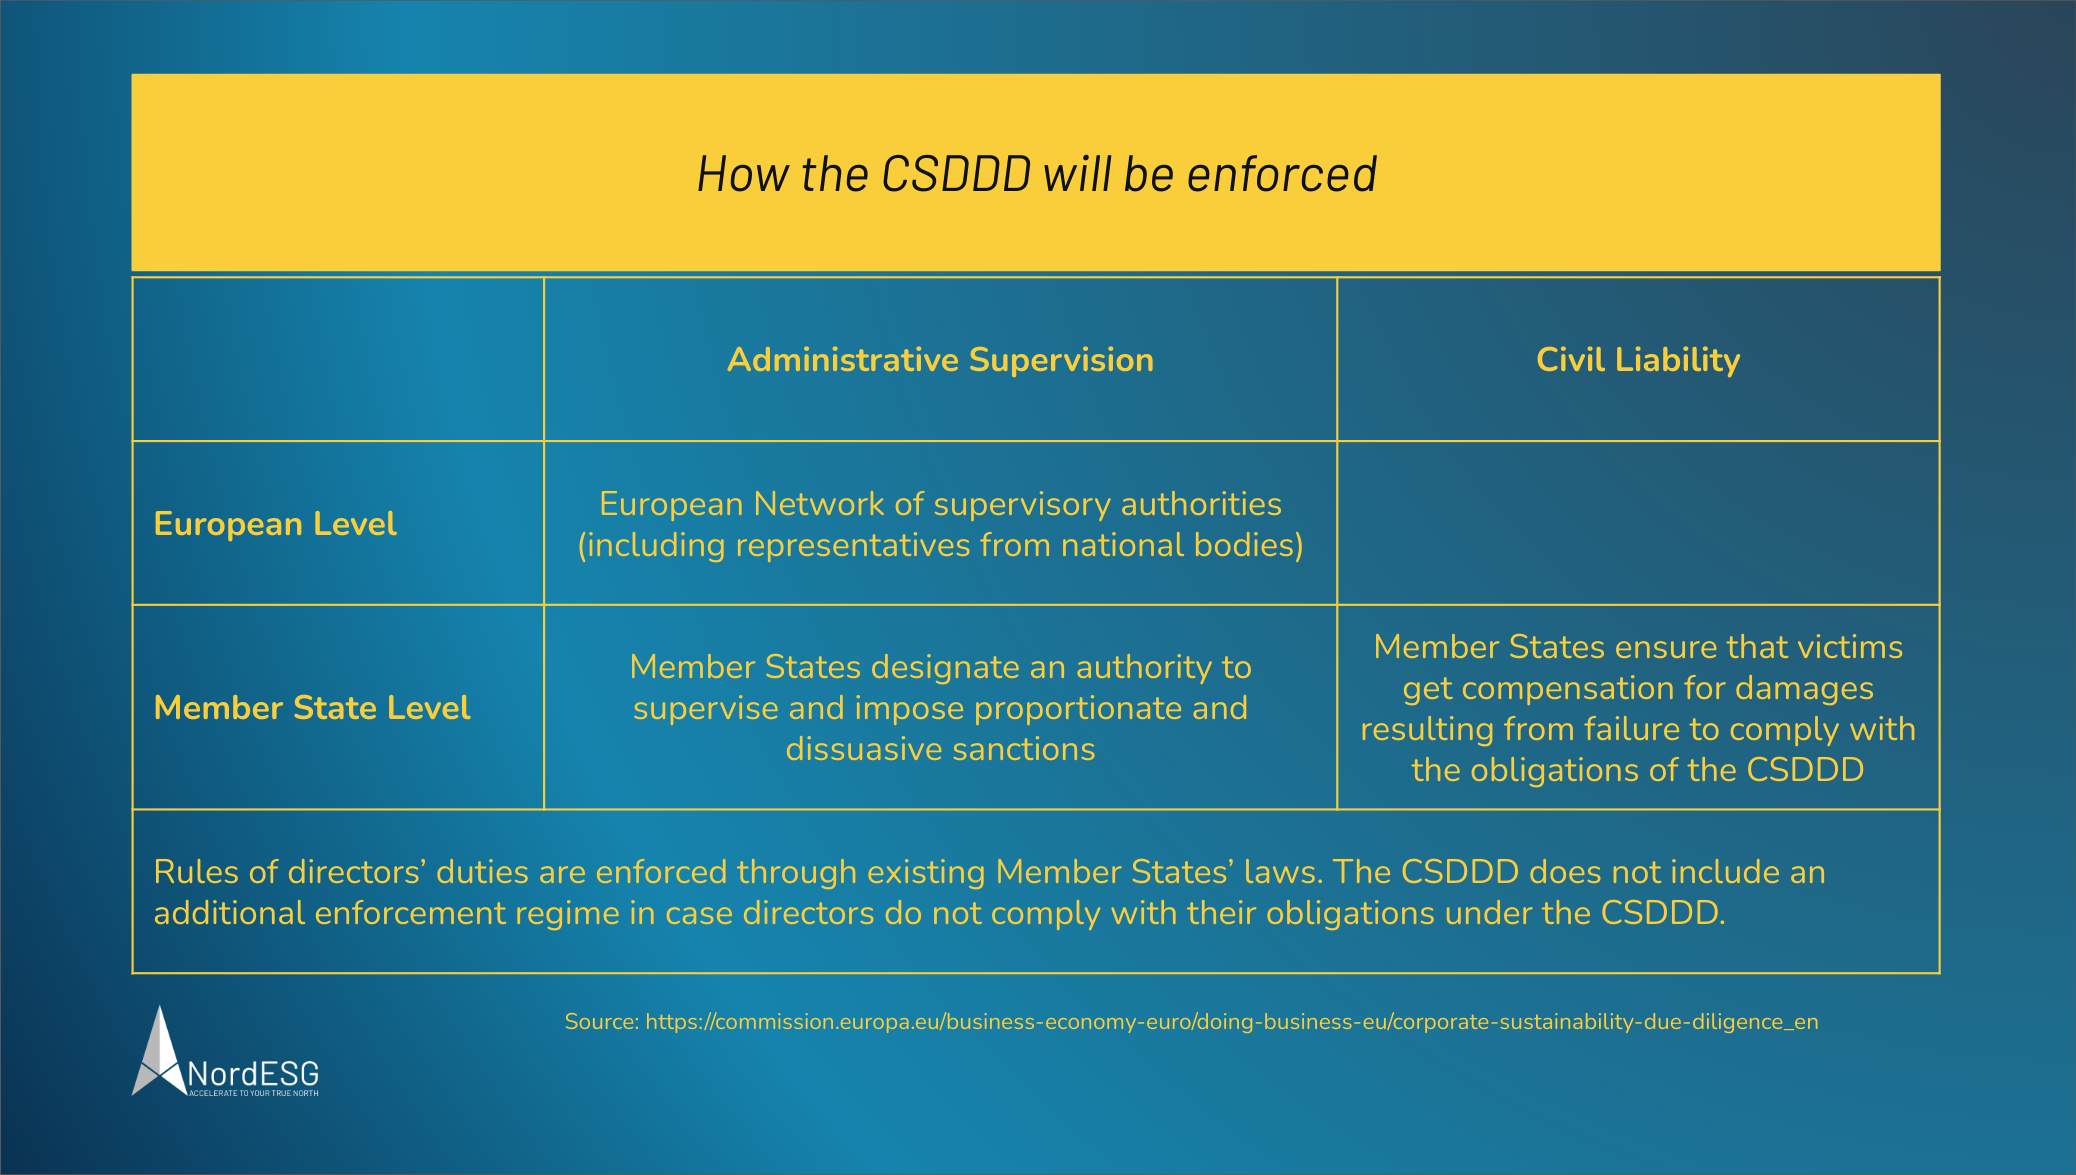 How the CSDDD Corporate Sustainability Due Diligence Directive will be enforced